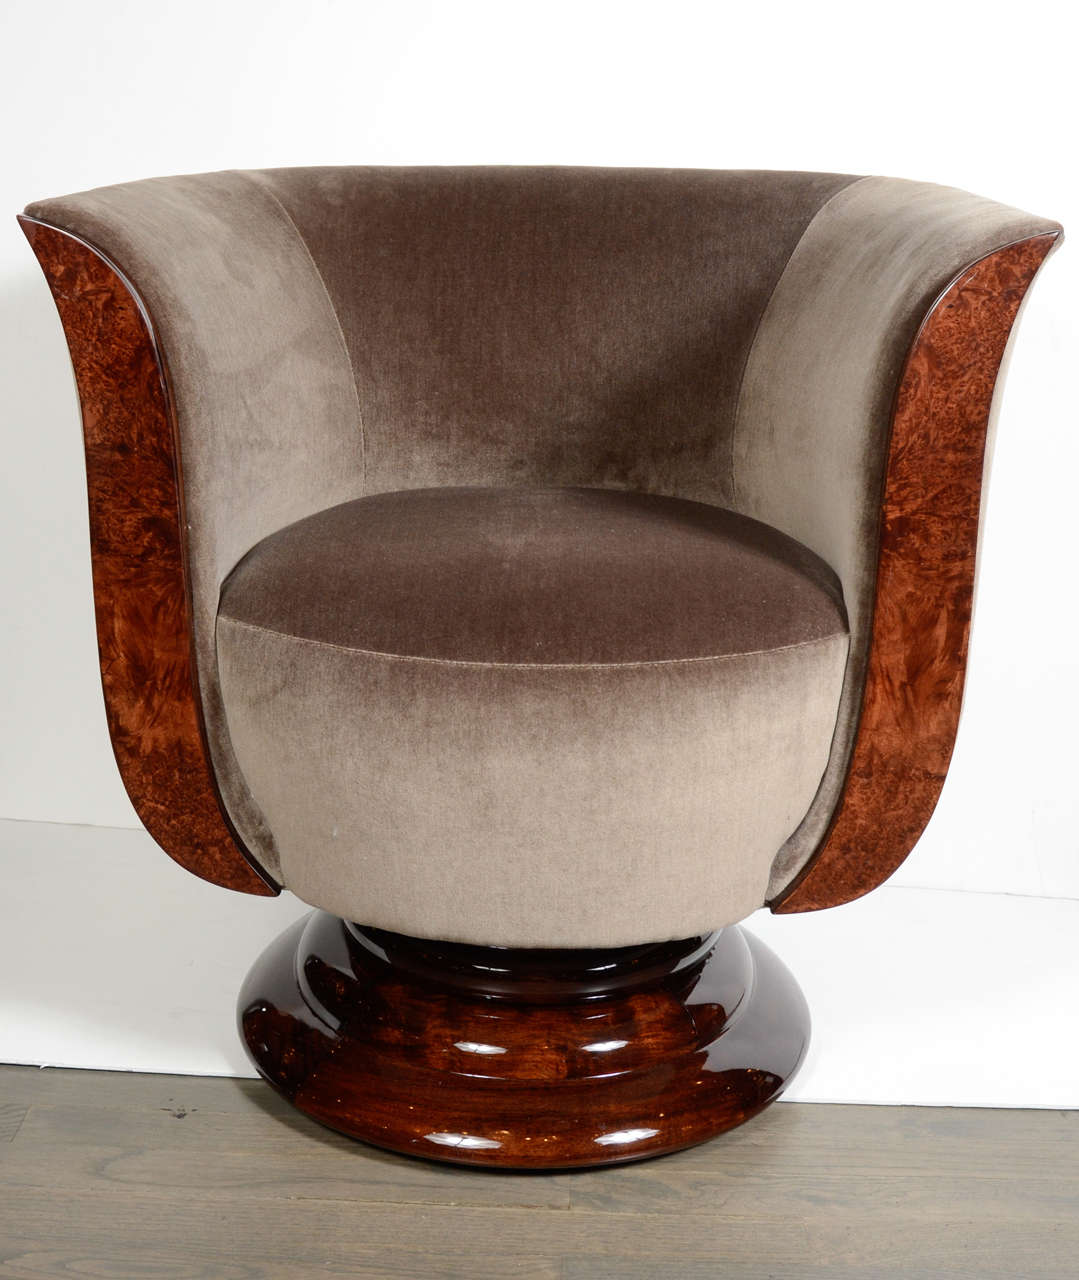 This pair of Art Deco Tulip Chairs feature burled carpathian elm on the arms and tiered skyscraper style base base, upholstered in luxurious expresso velvet.